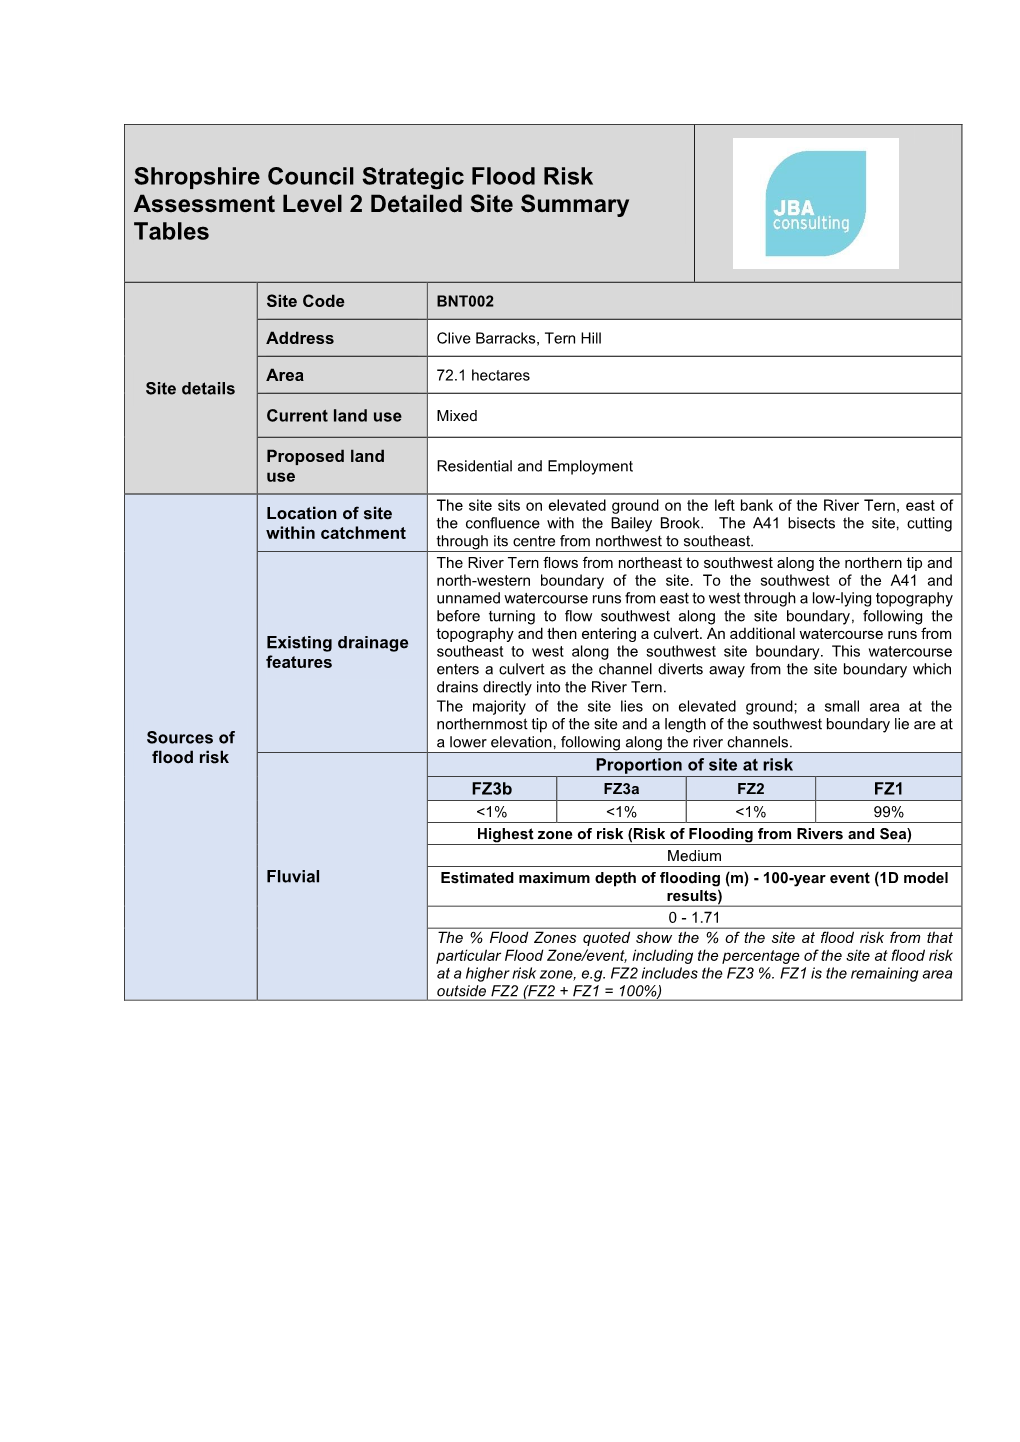 Shropshire Council Strategic Flood Risk Assessment Level 2 Detailed Site Summary Tables